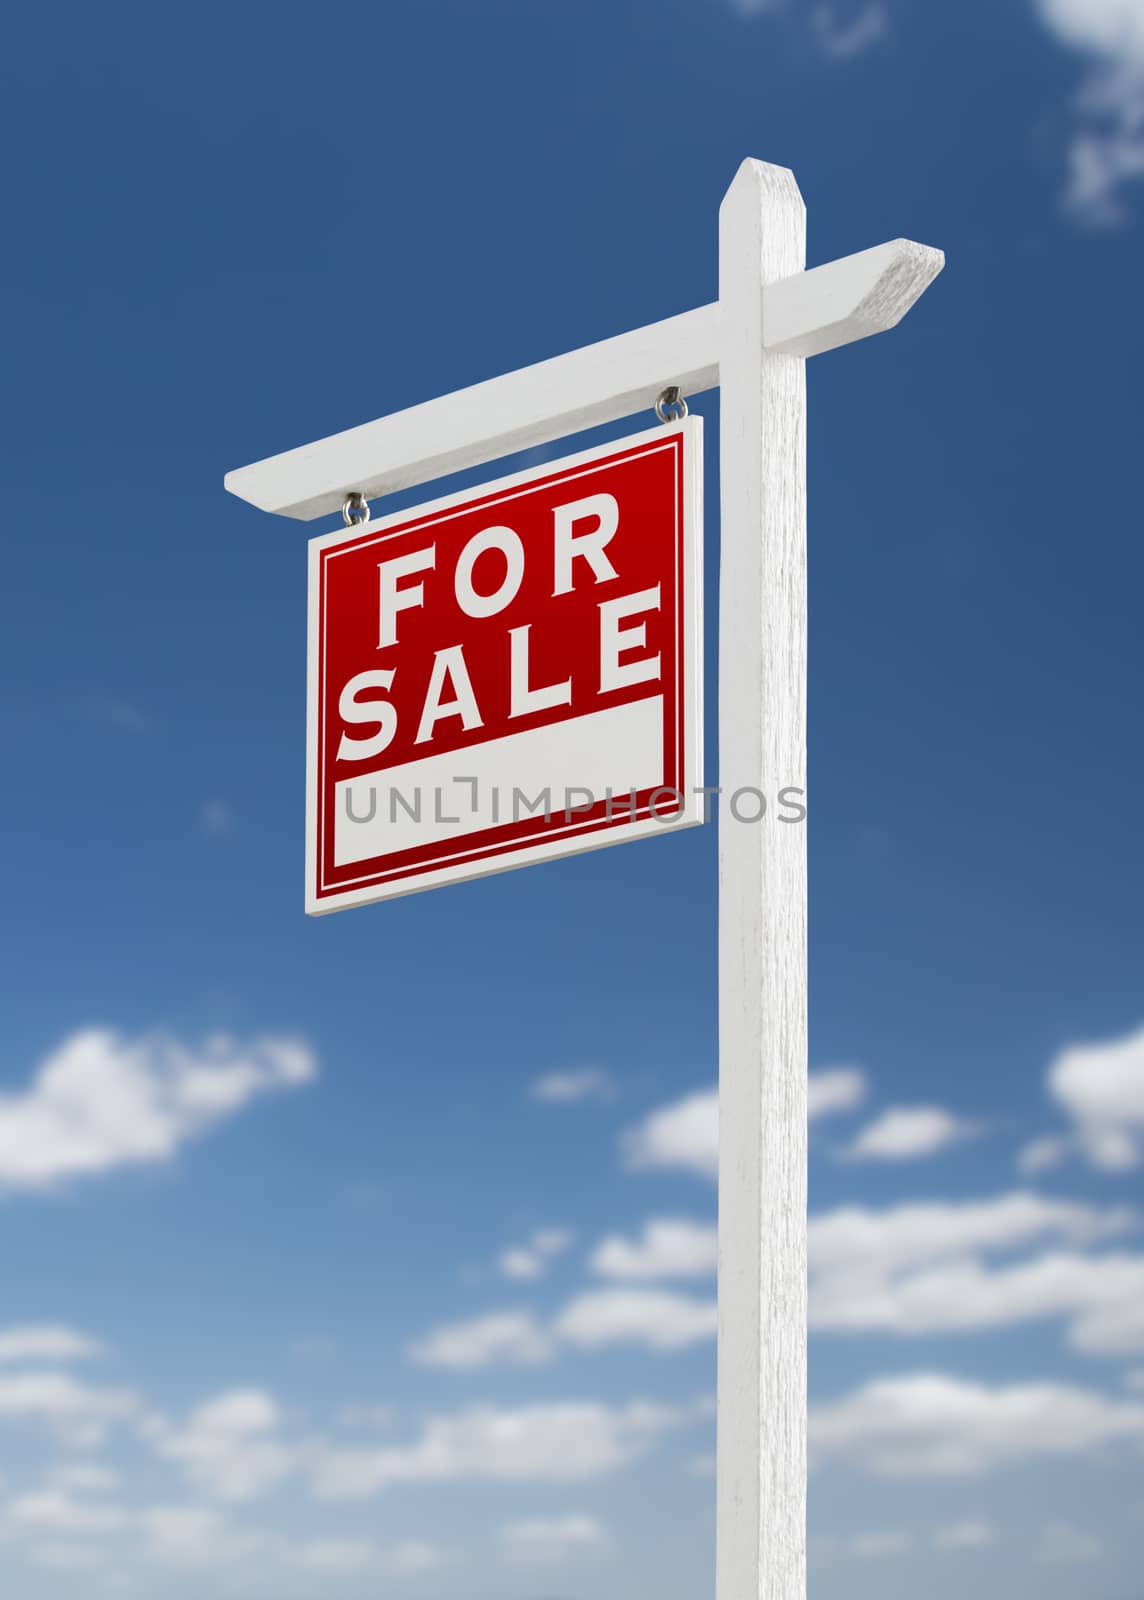 Left Facing For Sale Real Estate Sign on a Blue Sky with Clouds. by Feverpitched